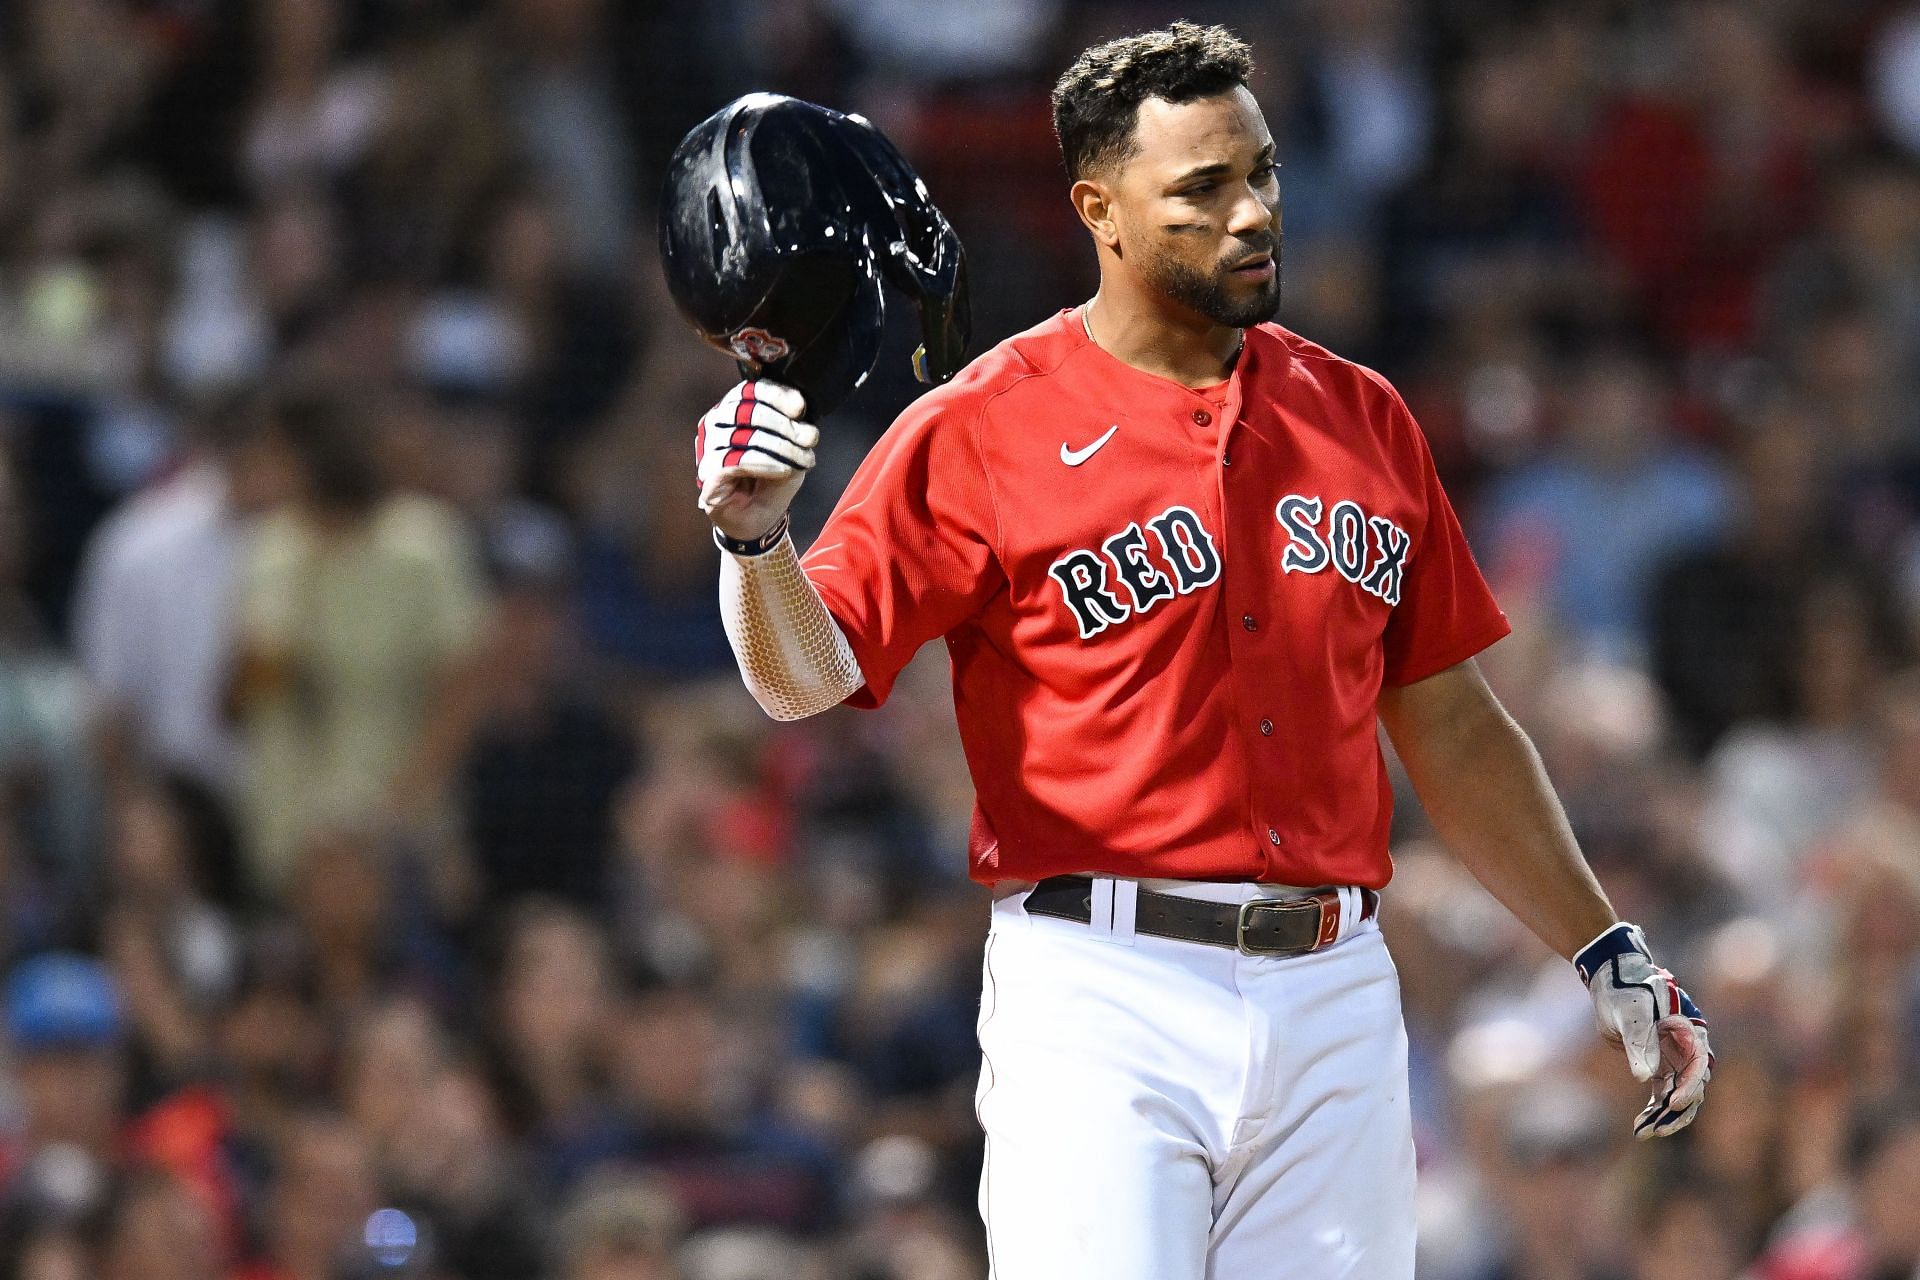 Xander Bogaerts slams his helment down in frustration after striking out during a MLB New York Yankees v Boston Red Sox game at Fenway Park.